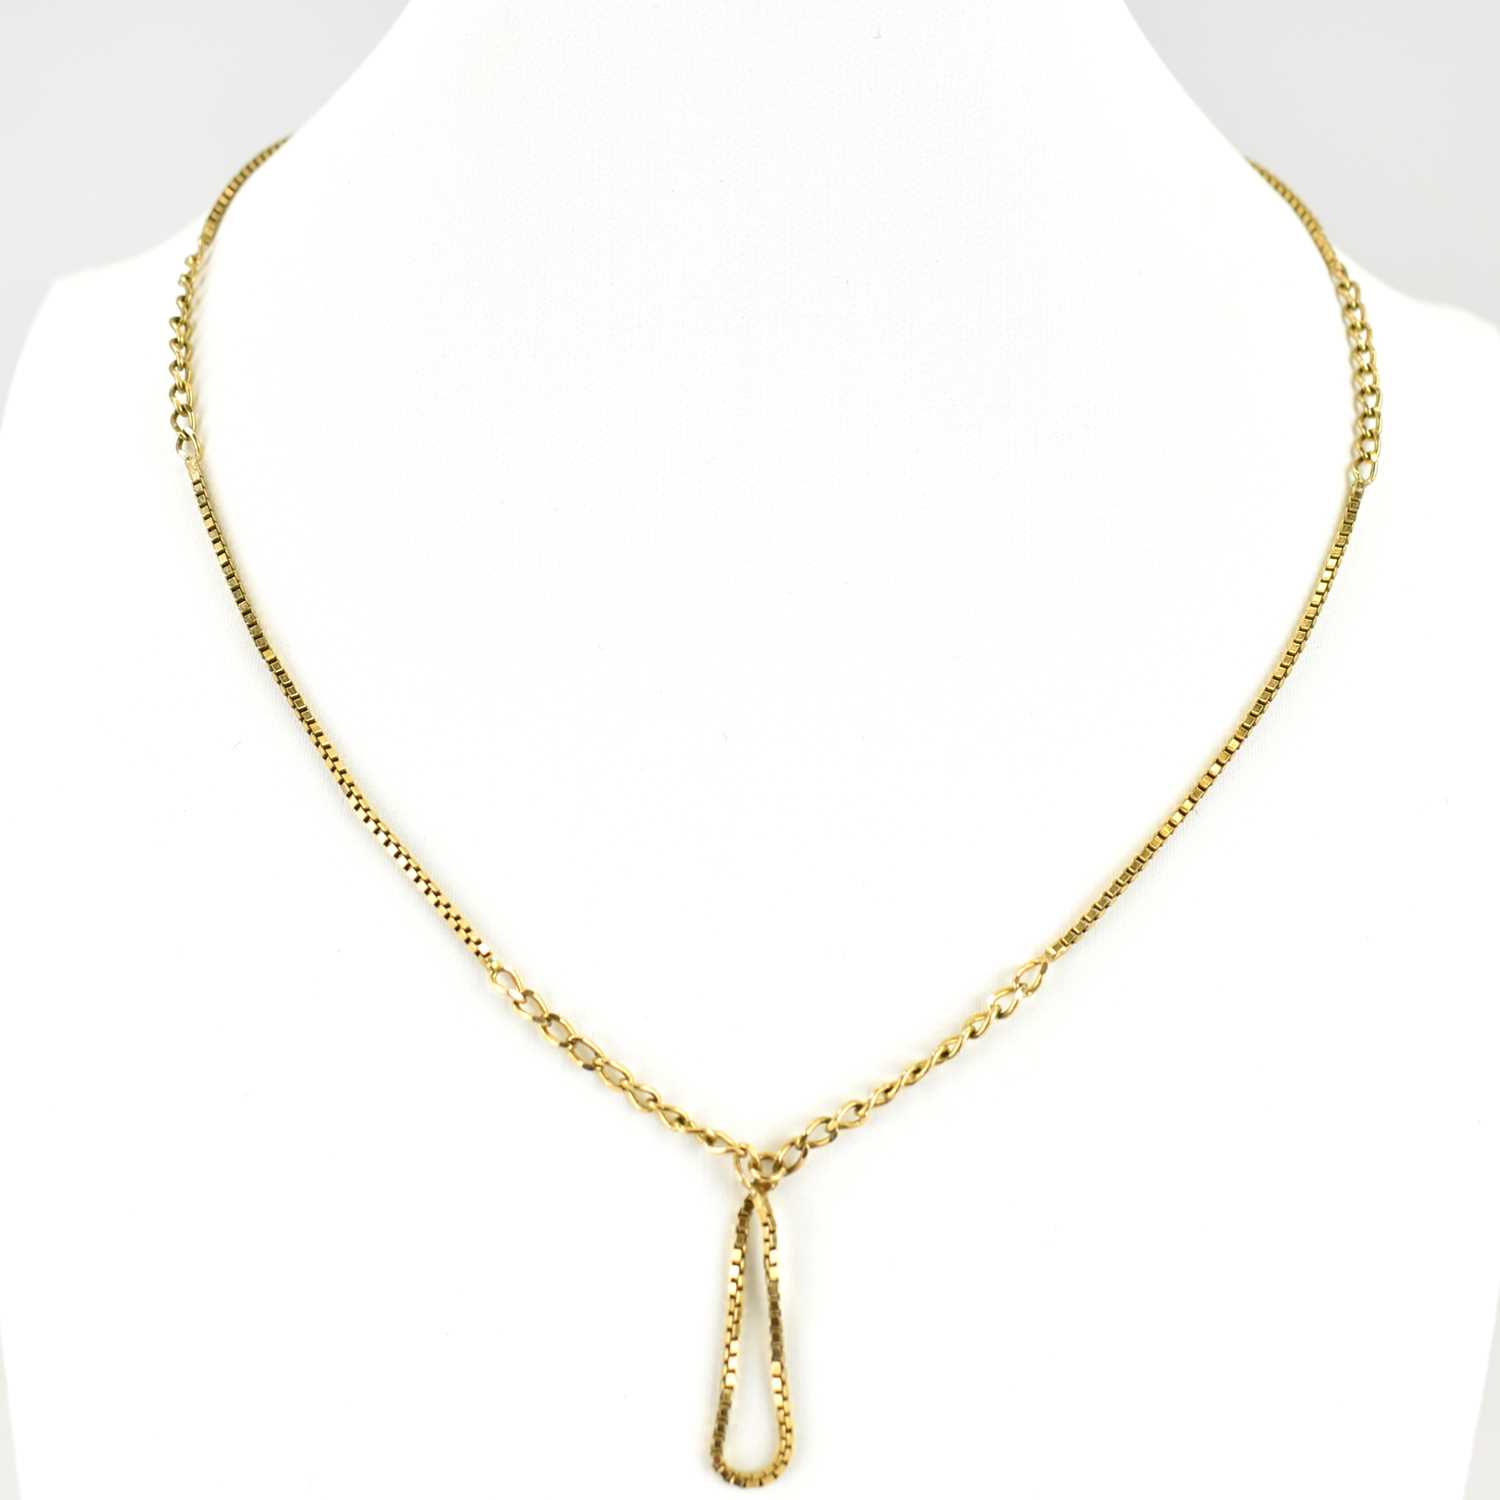 A 9ct gold box and chain link necklace with a small box link hoop pendant, with circular clasp, - Image 2 of 2